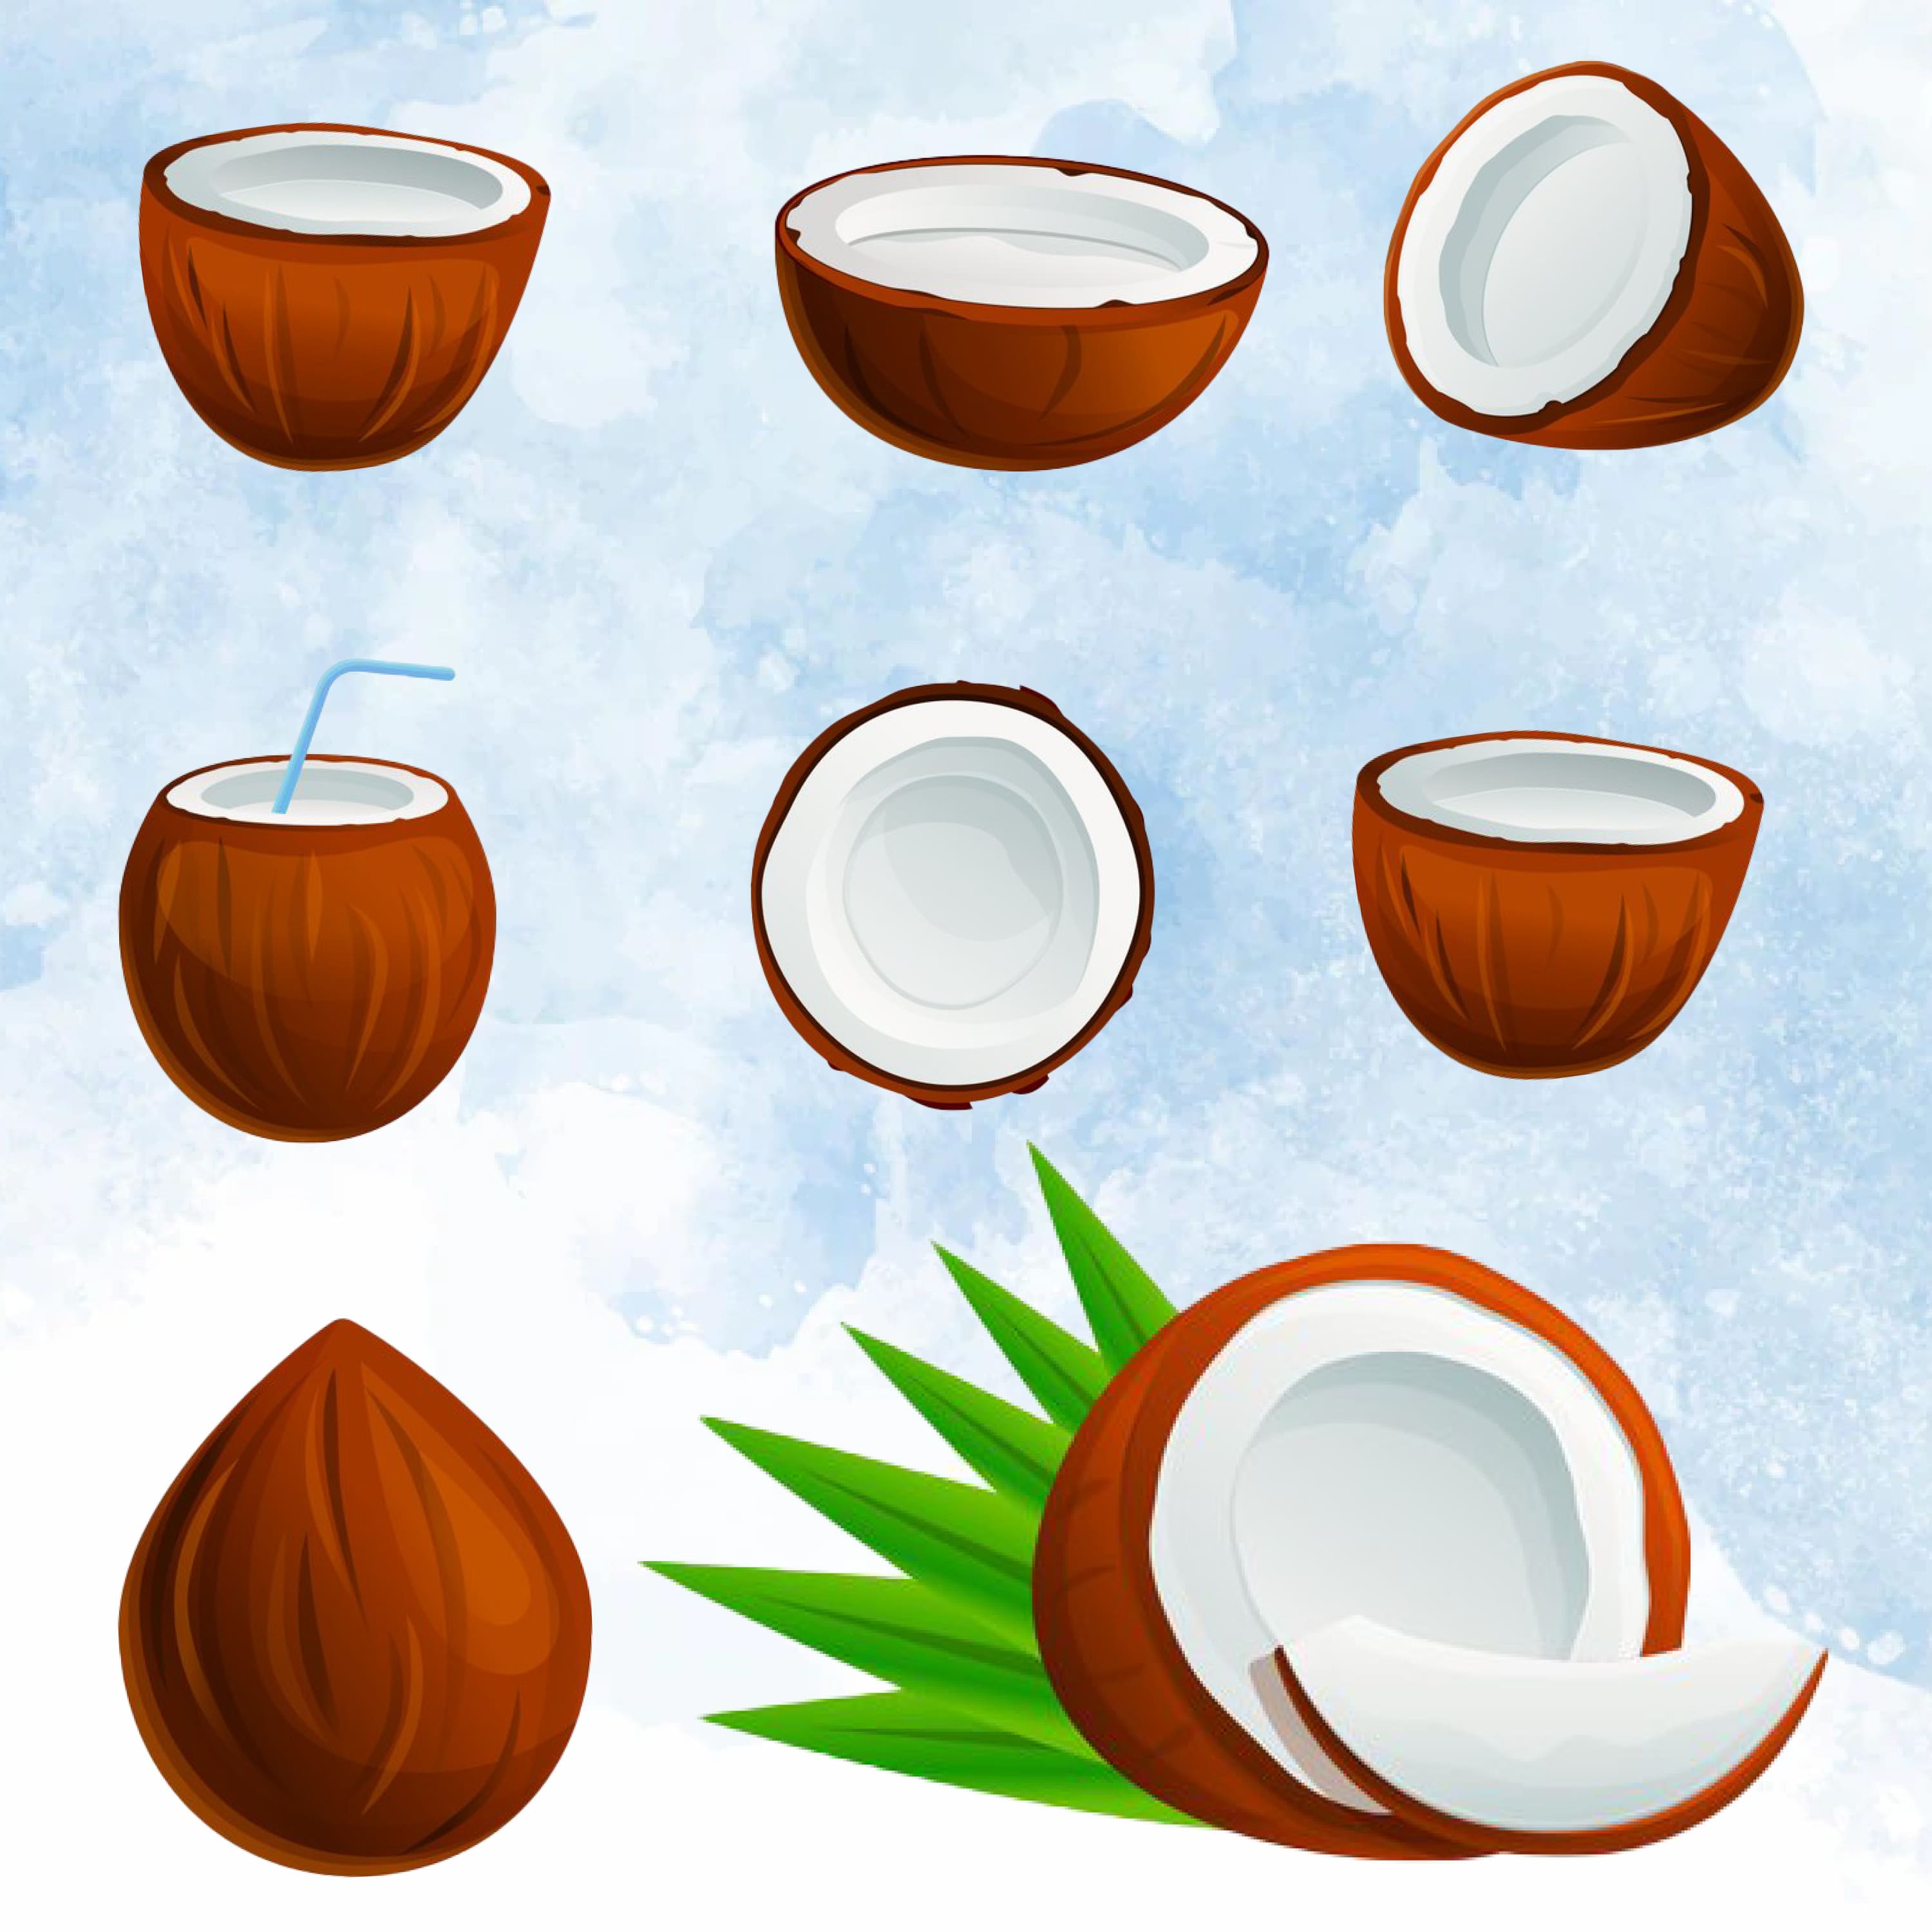 Coconut icons set, cartoon style cover.